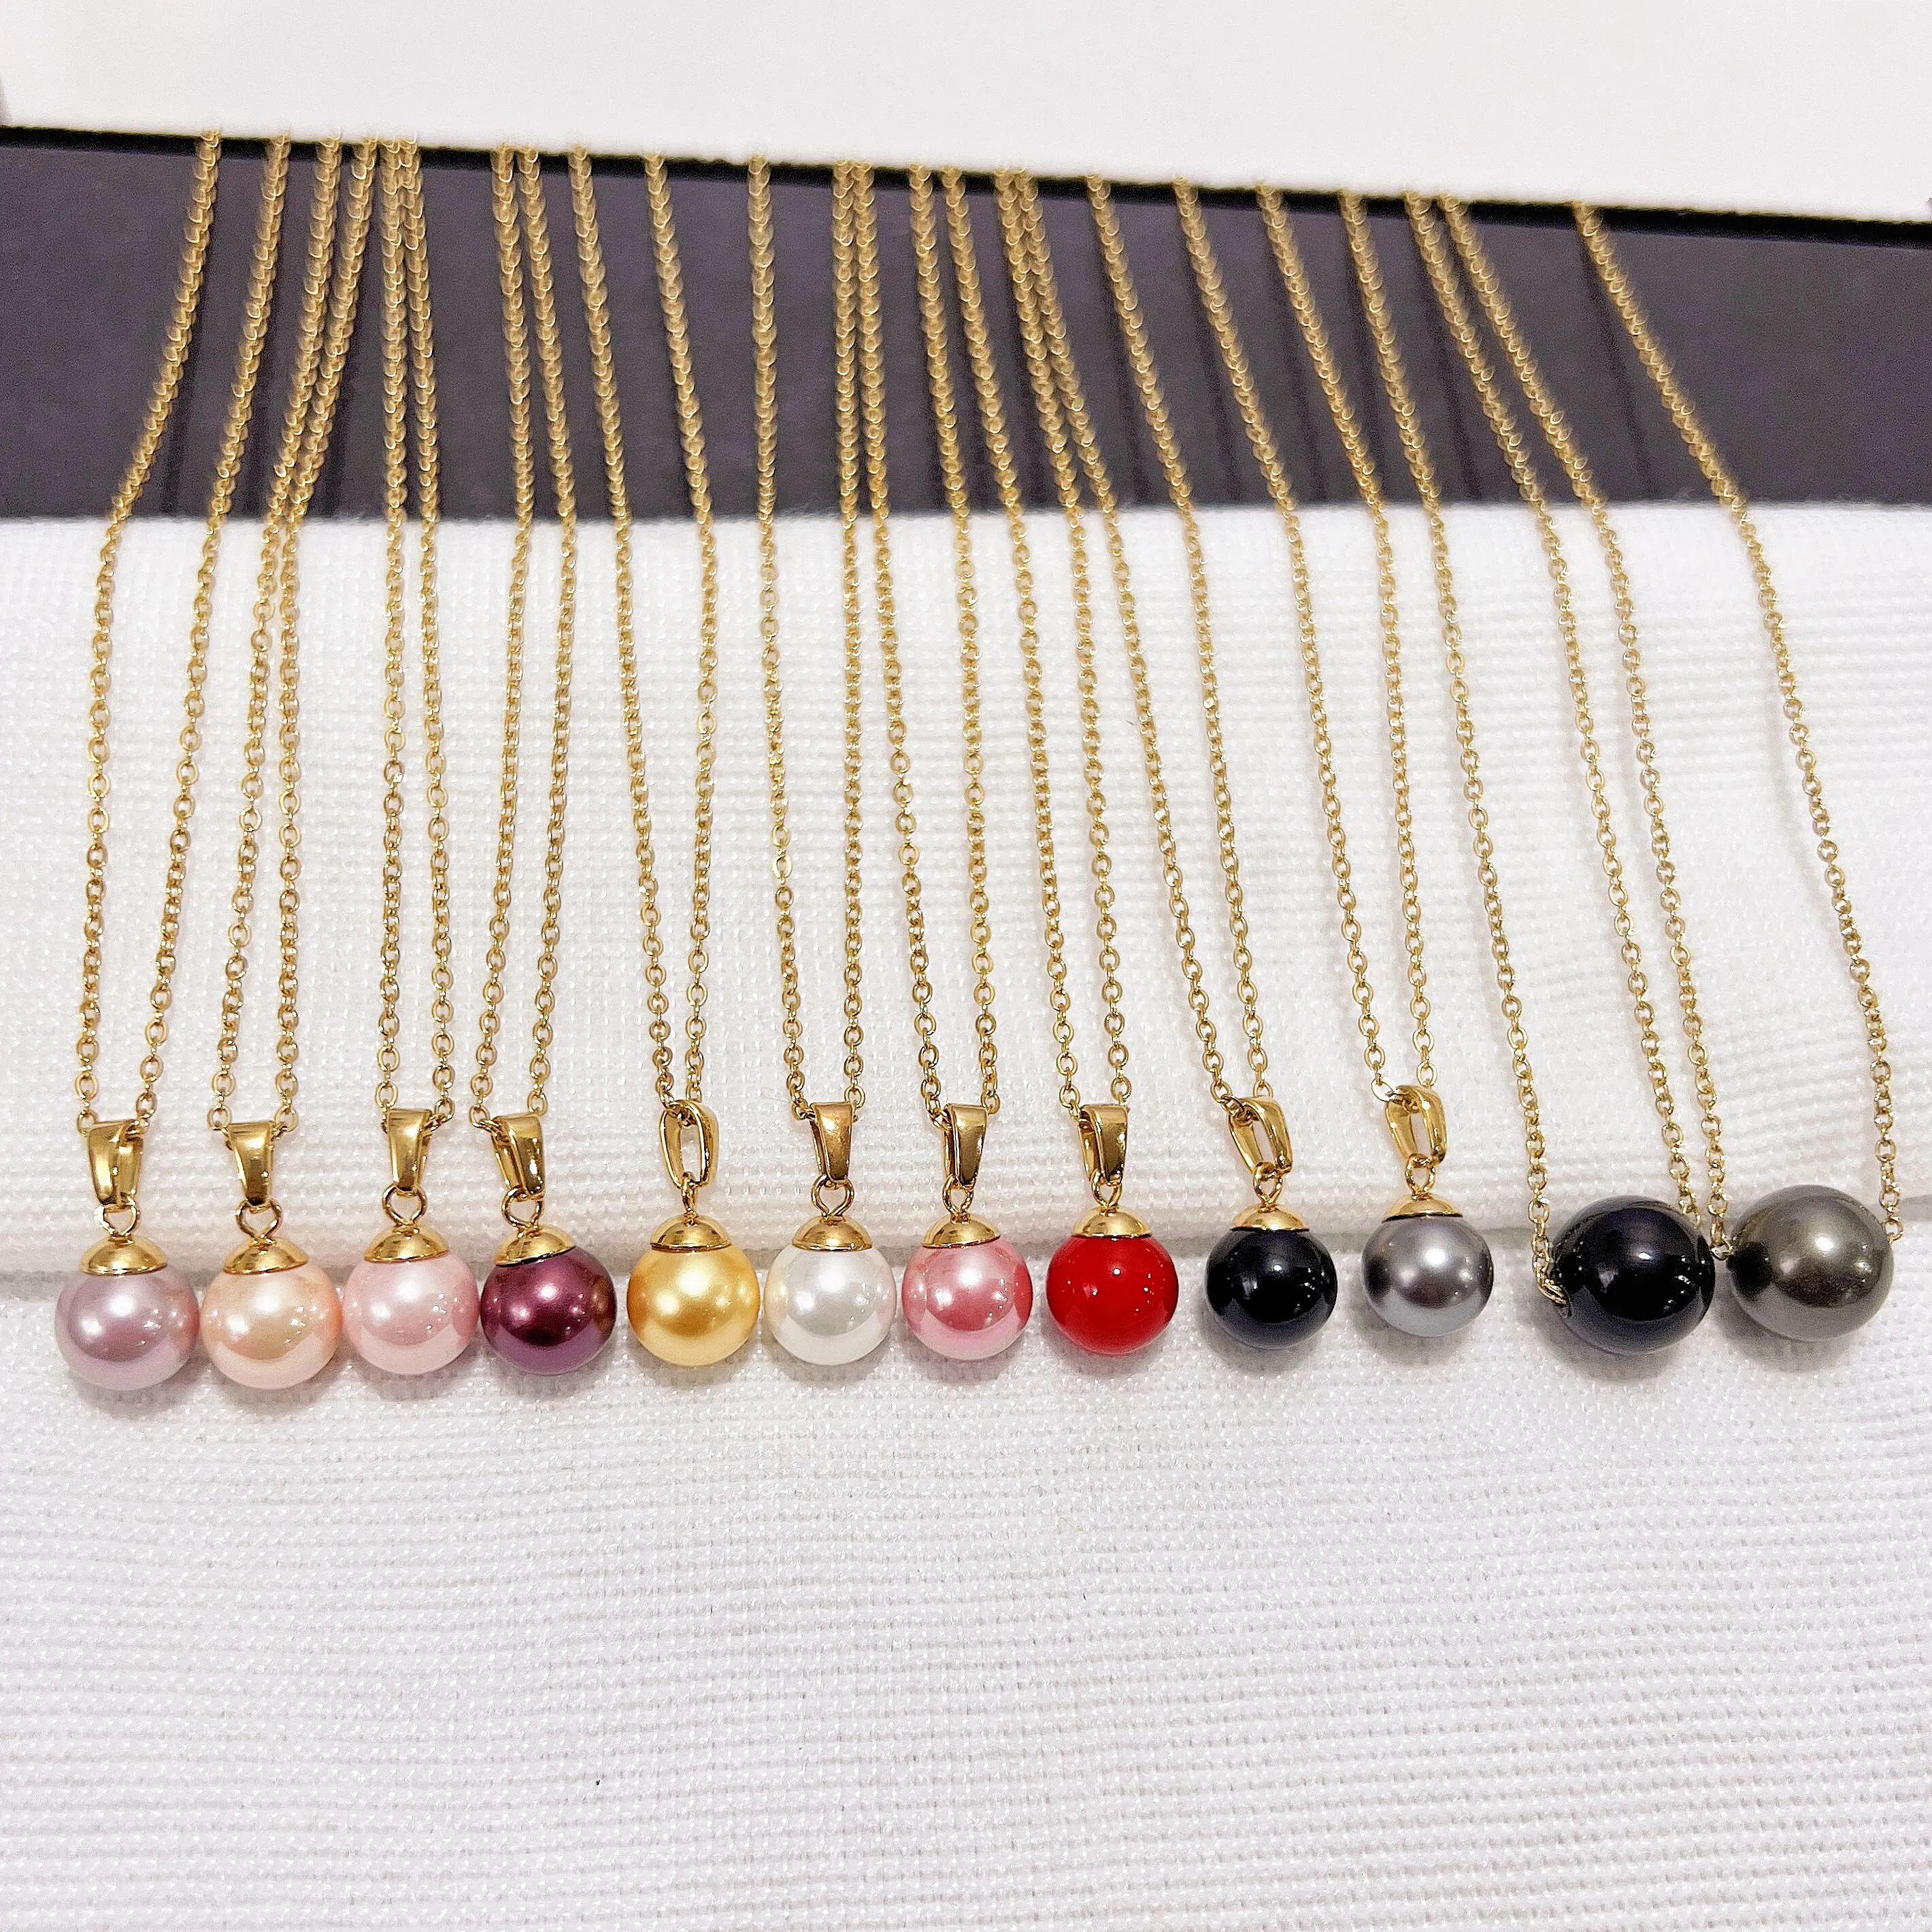 Gold Plated Single Fashion Artificial Pearl Pendant Necklace Colorful Pearl Necklace For Women Jewelry Anniversary Wedding Gift